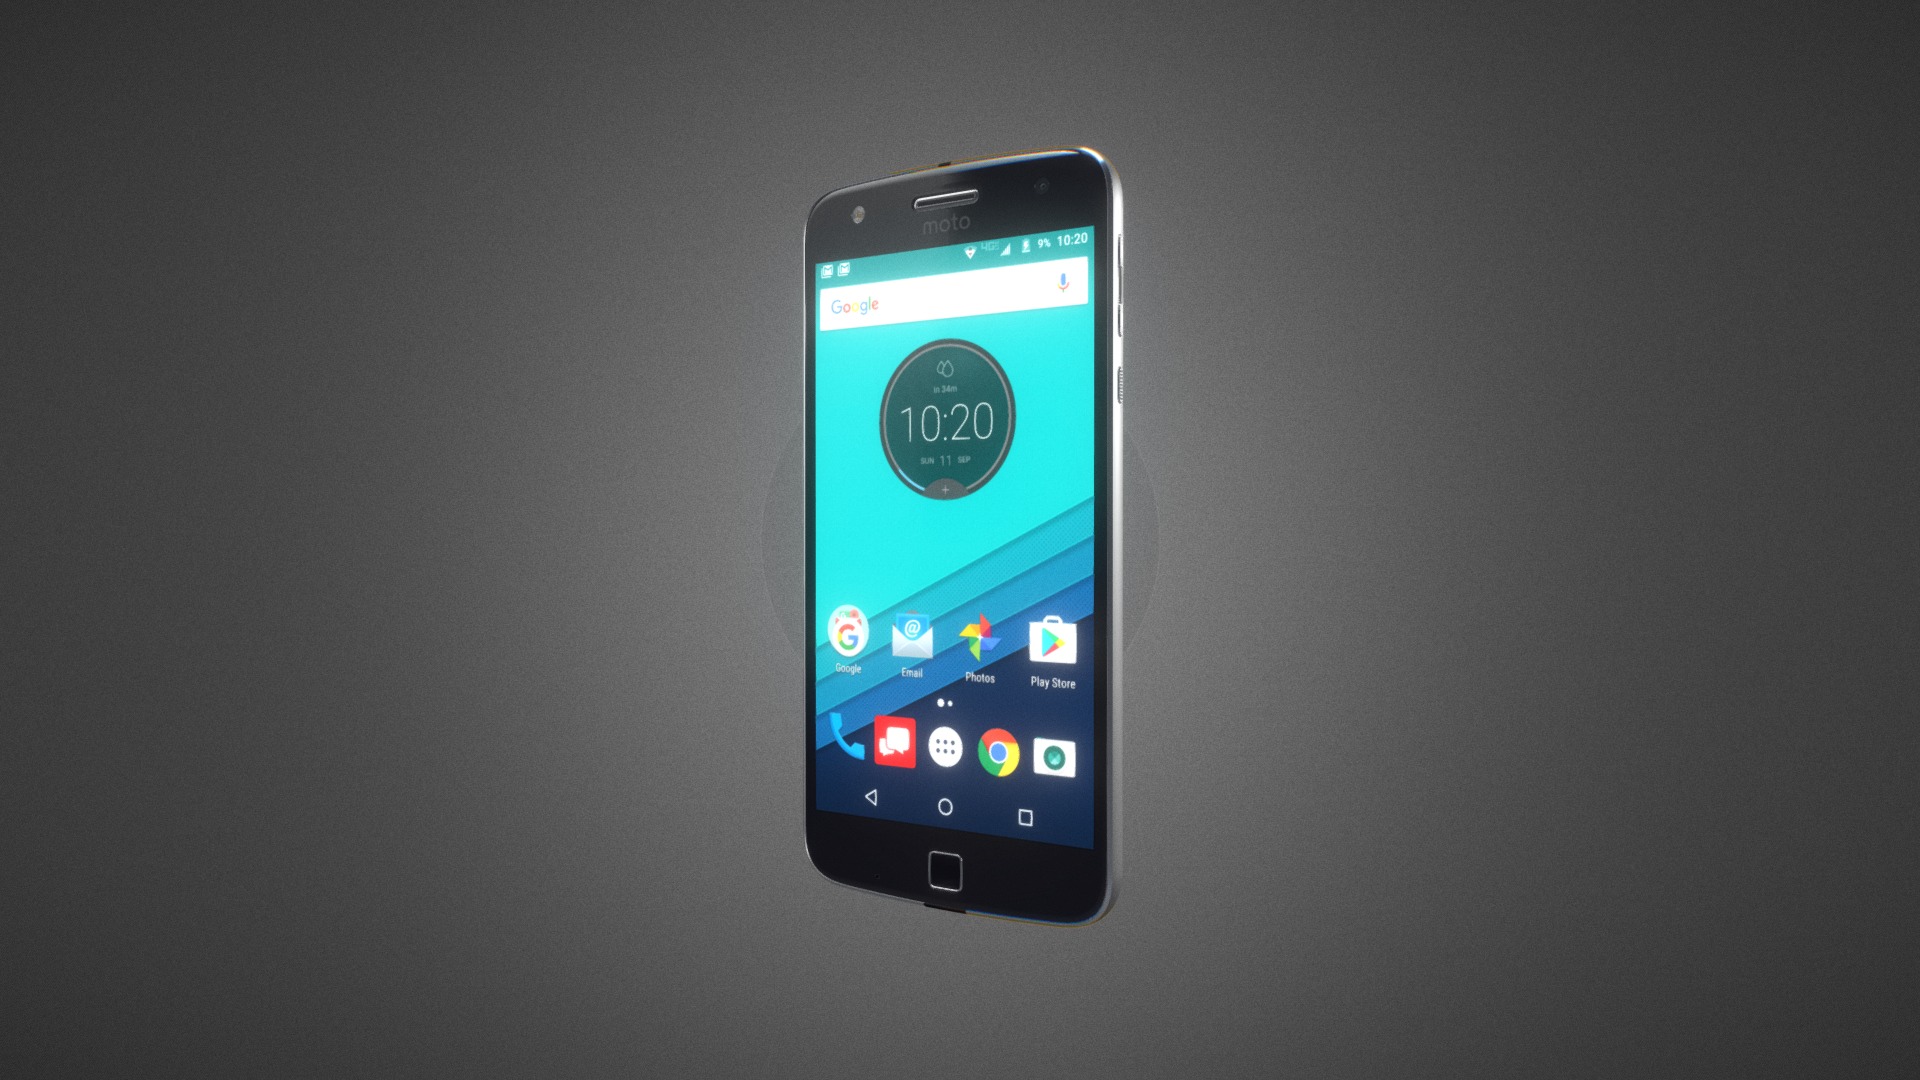 3D model Motorola Moto Z Play for Element 3D - This is a 3D model of the Motorola Moto Z Play for Element 3D. The 3D model is about a cell phone with a blue screen.